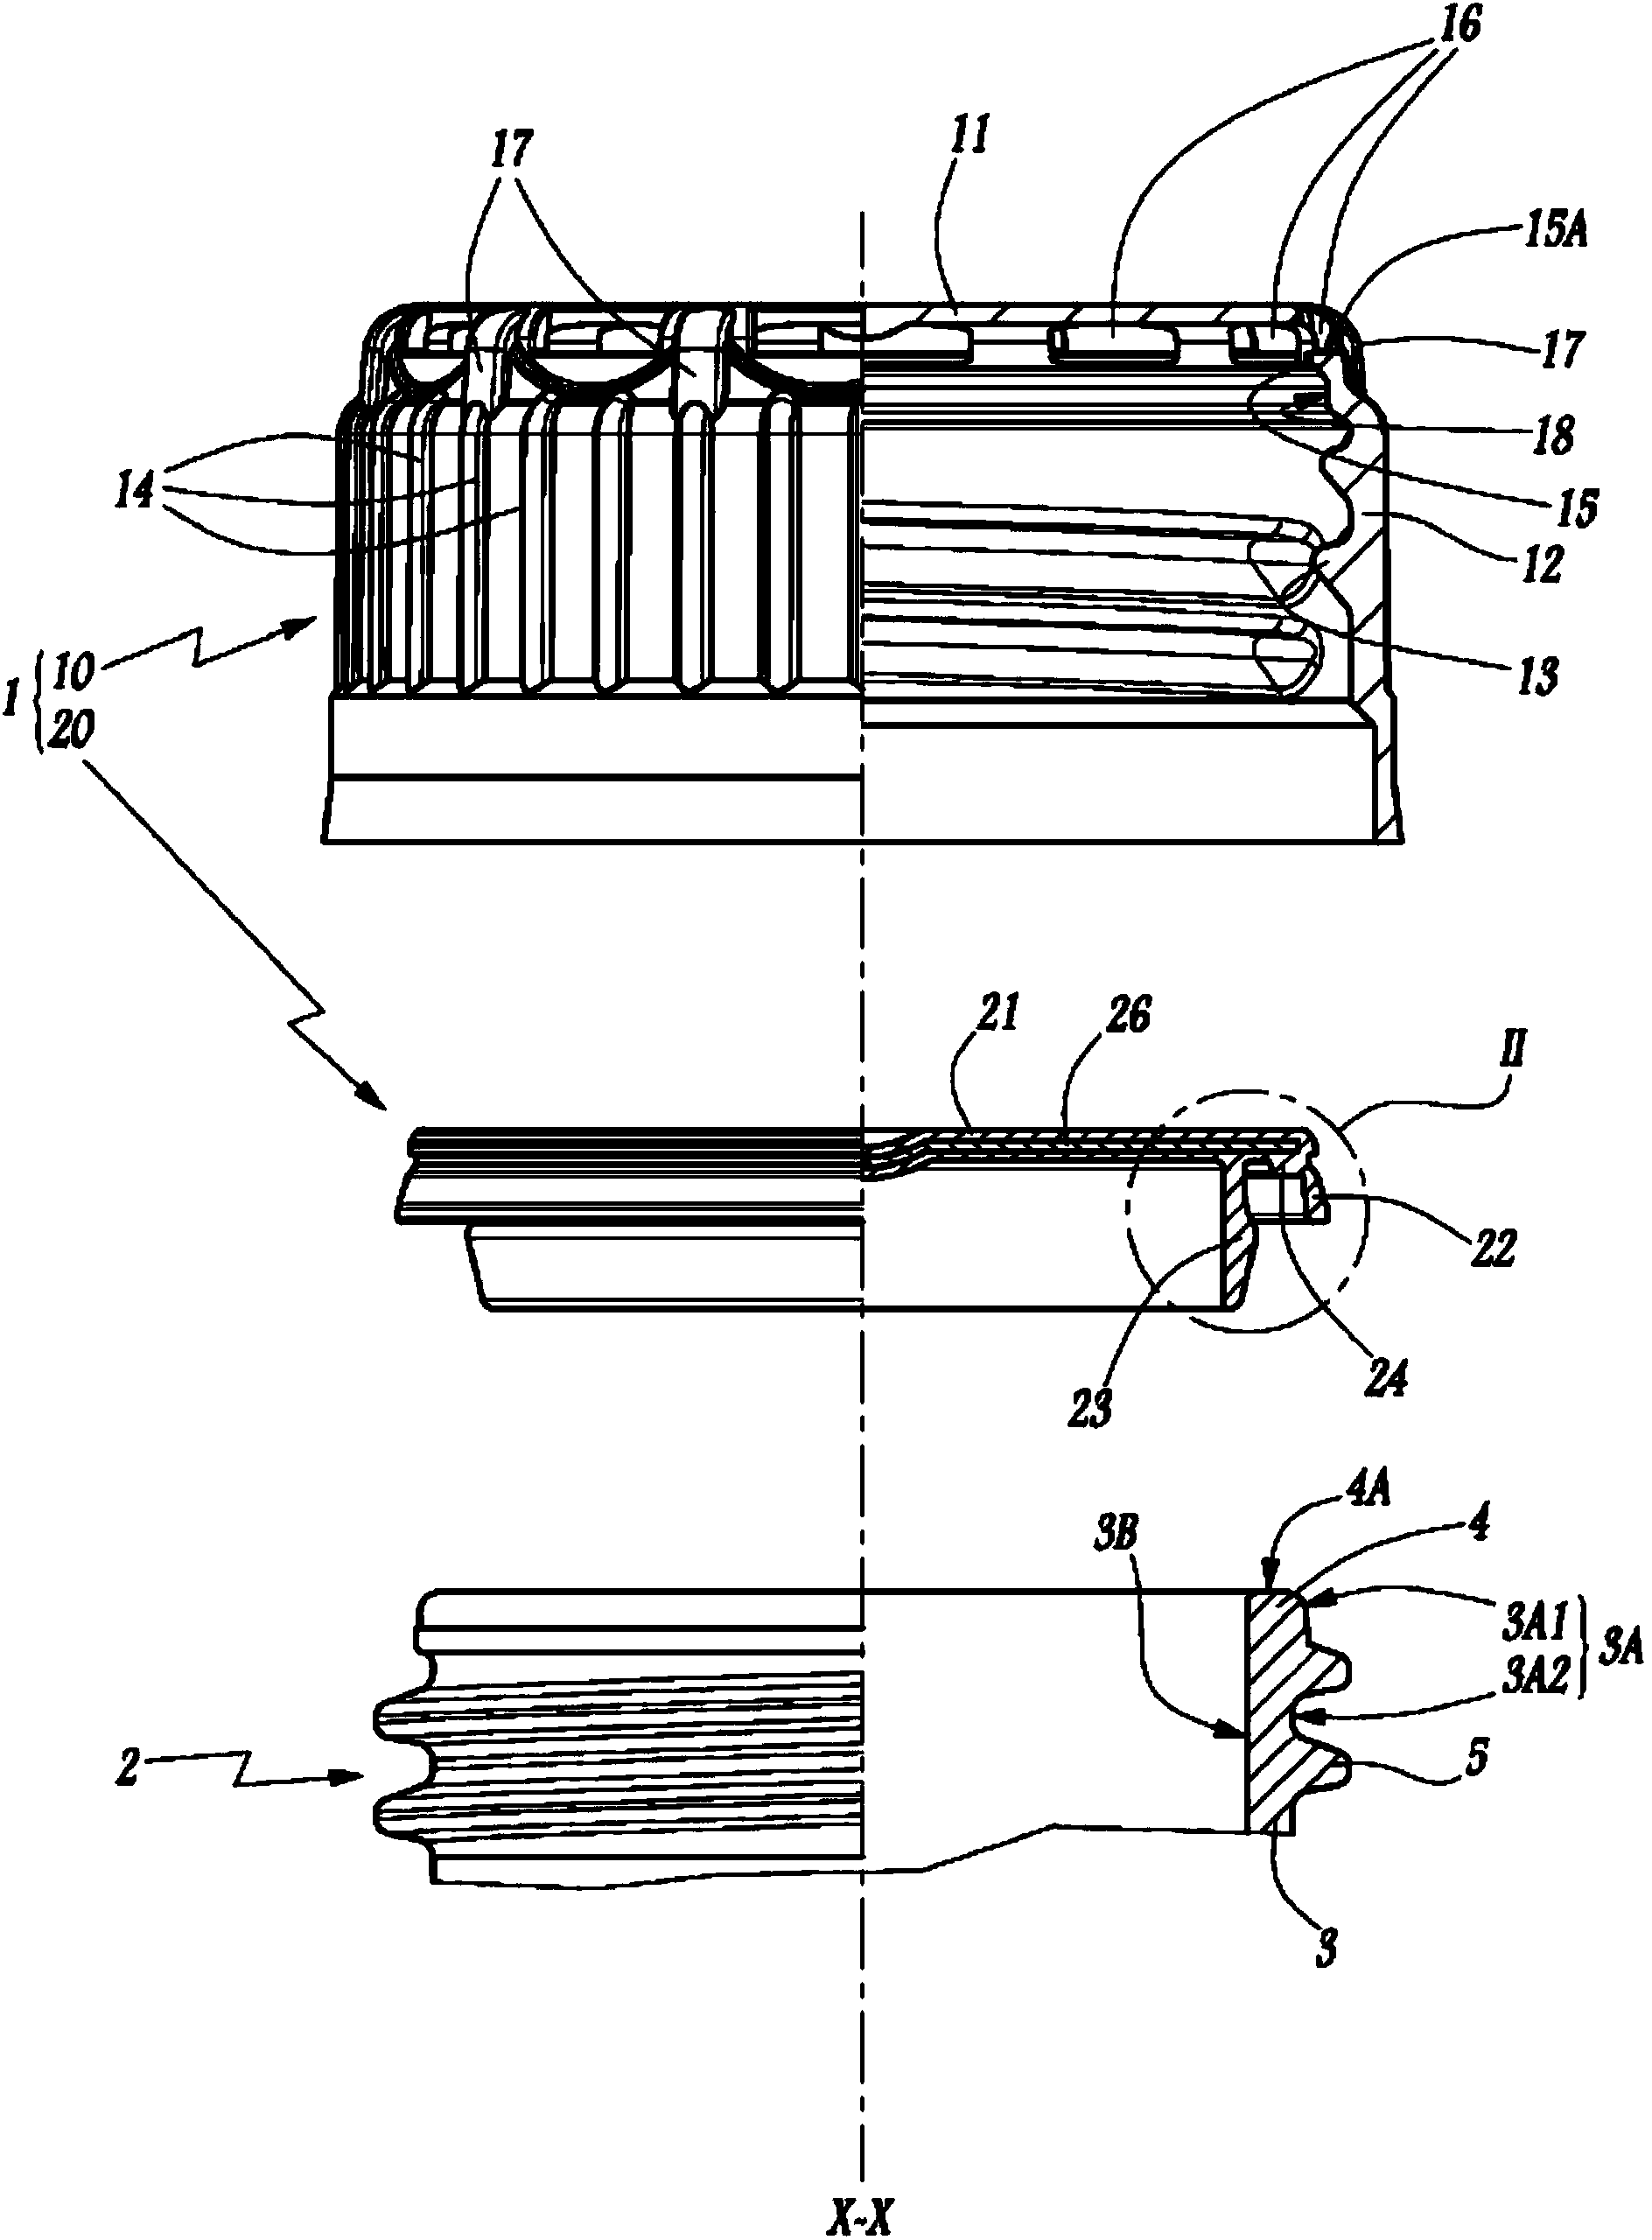 Stopper device for plugging a neck of a container